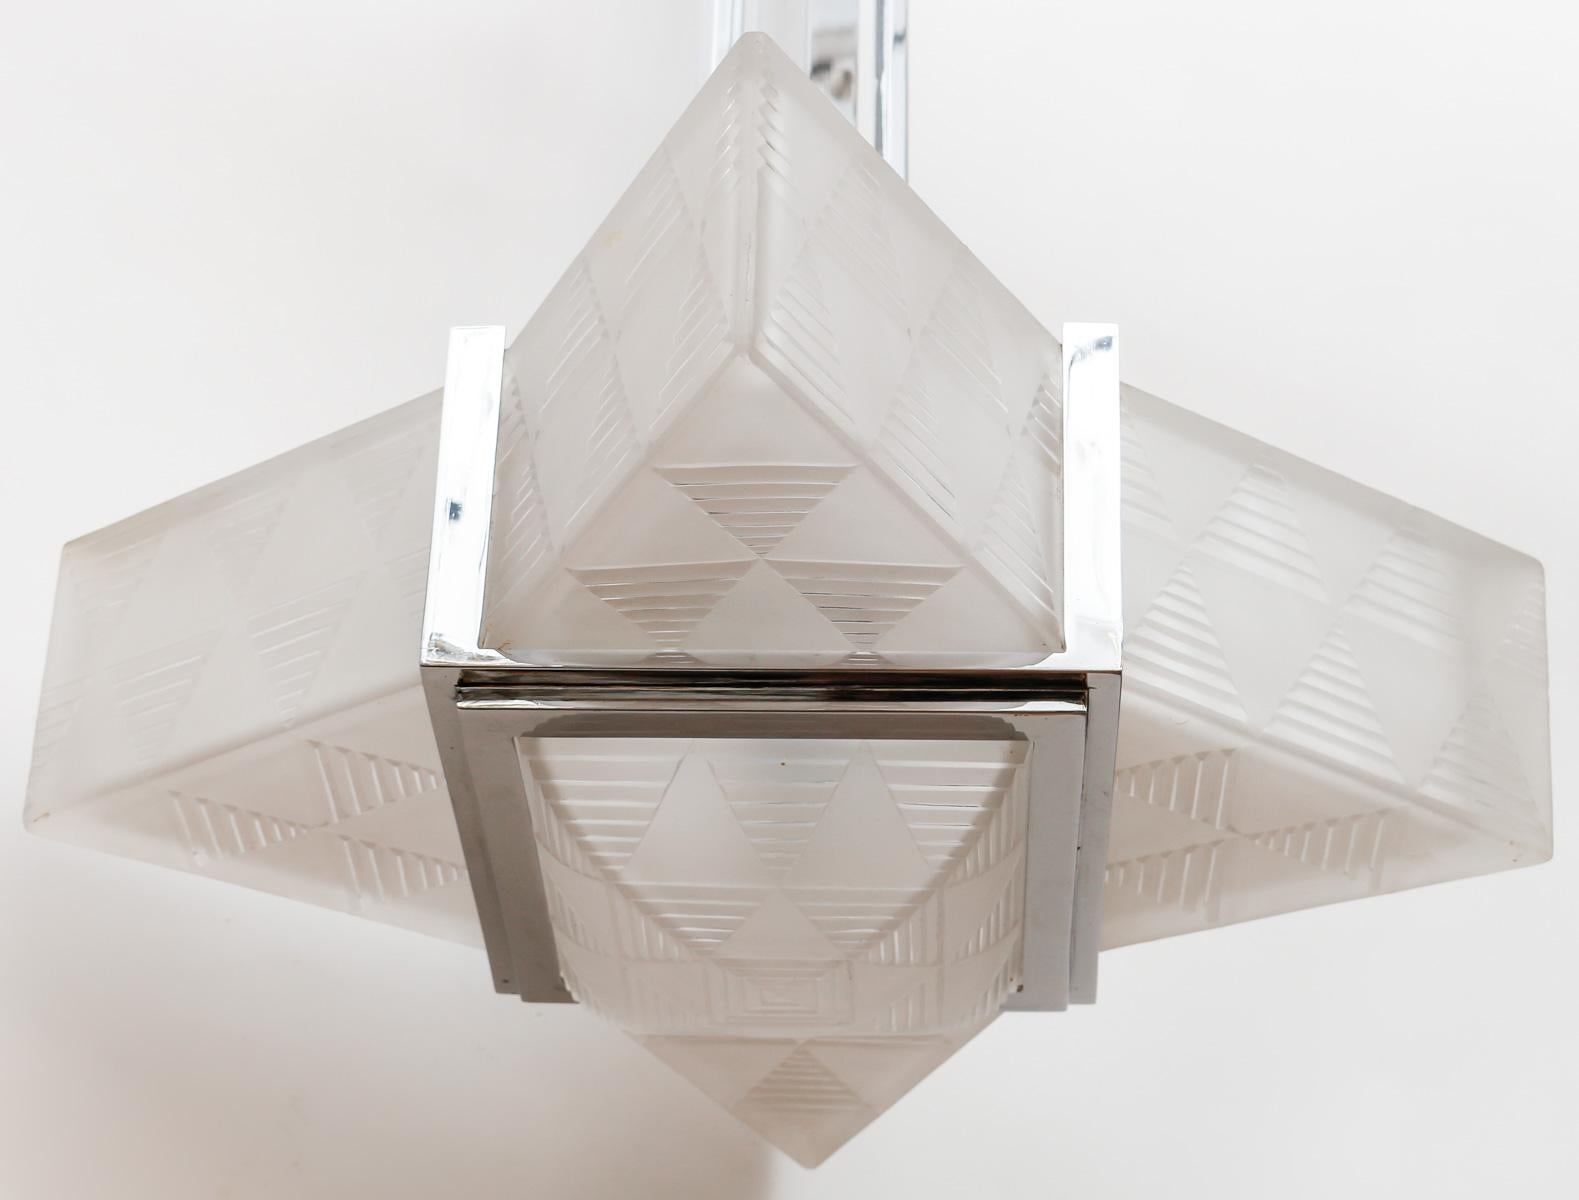 Art Deco Modernist “Triangle” Chandelier dating from the 1930 designed by Henri Petitot and made is his Atelier.

4 Modernist Triangle in thick engraved and sandblated glass, a basin in thick engraved and sandblasted glass and a nickel-plated bronze